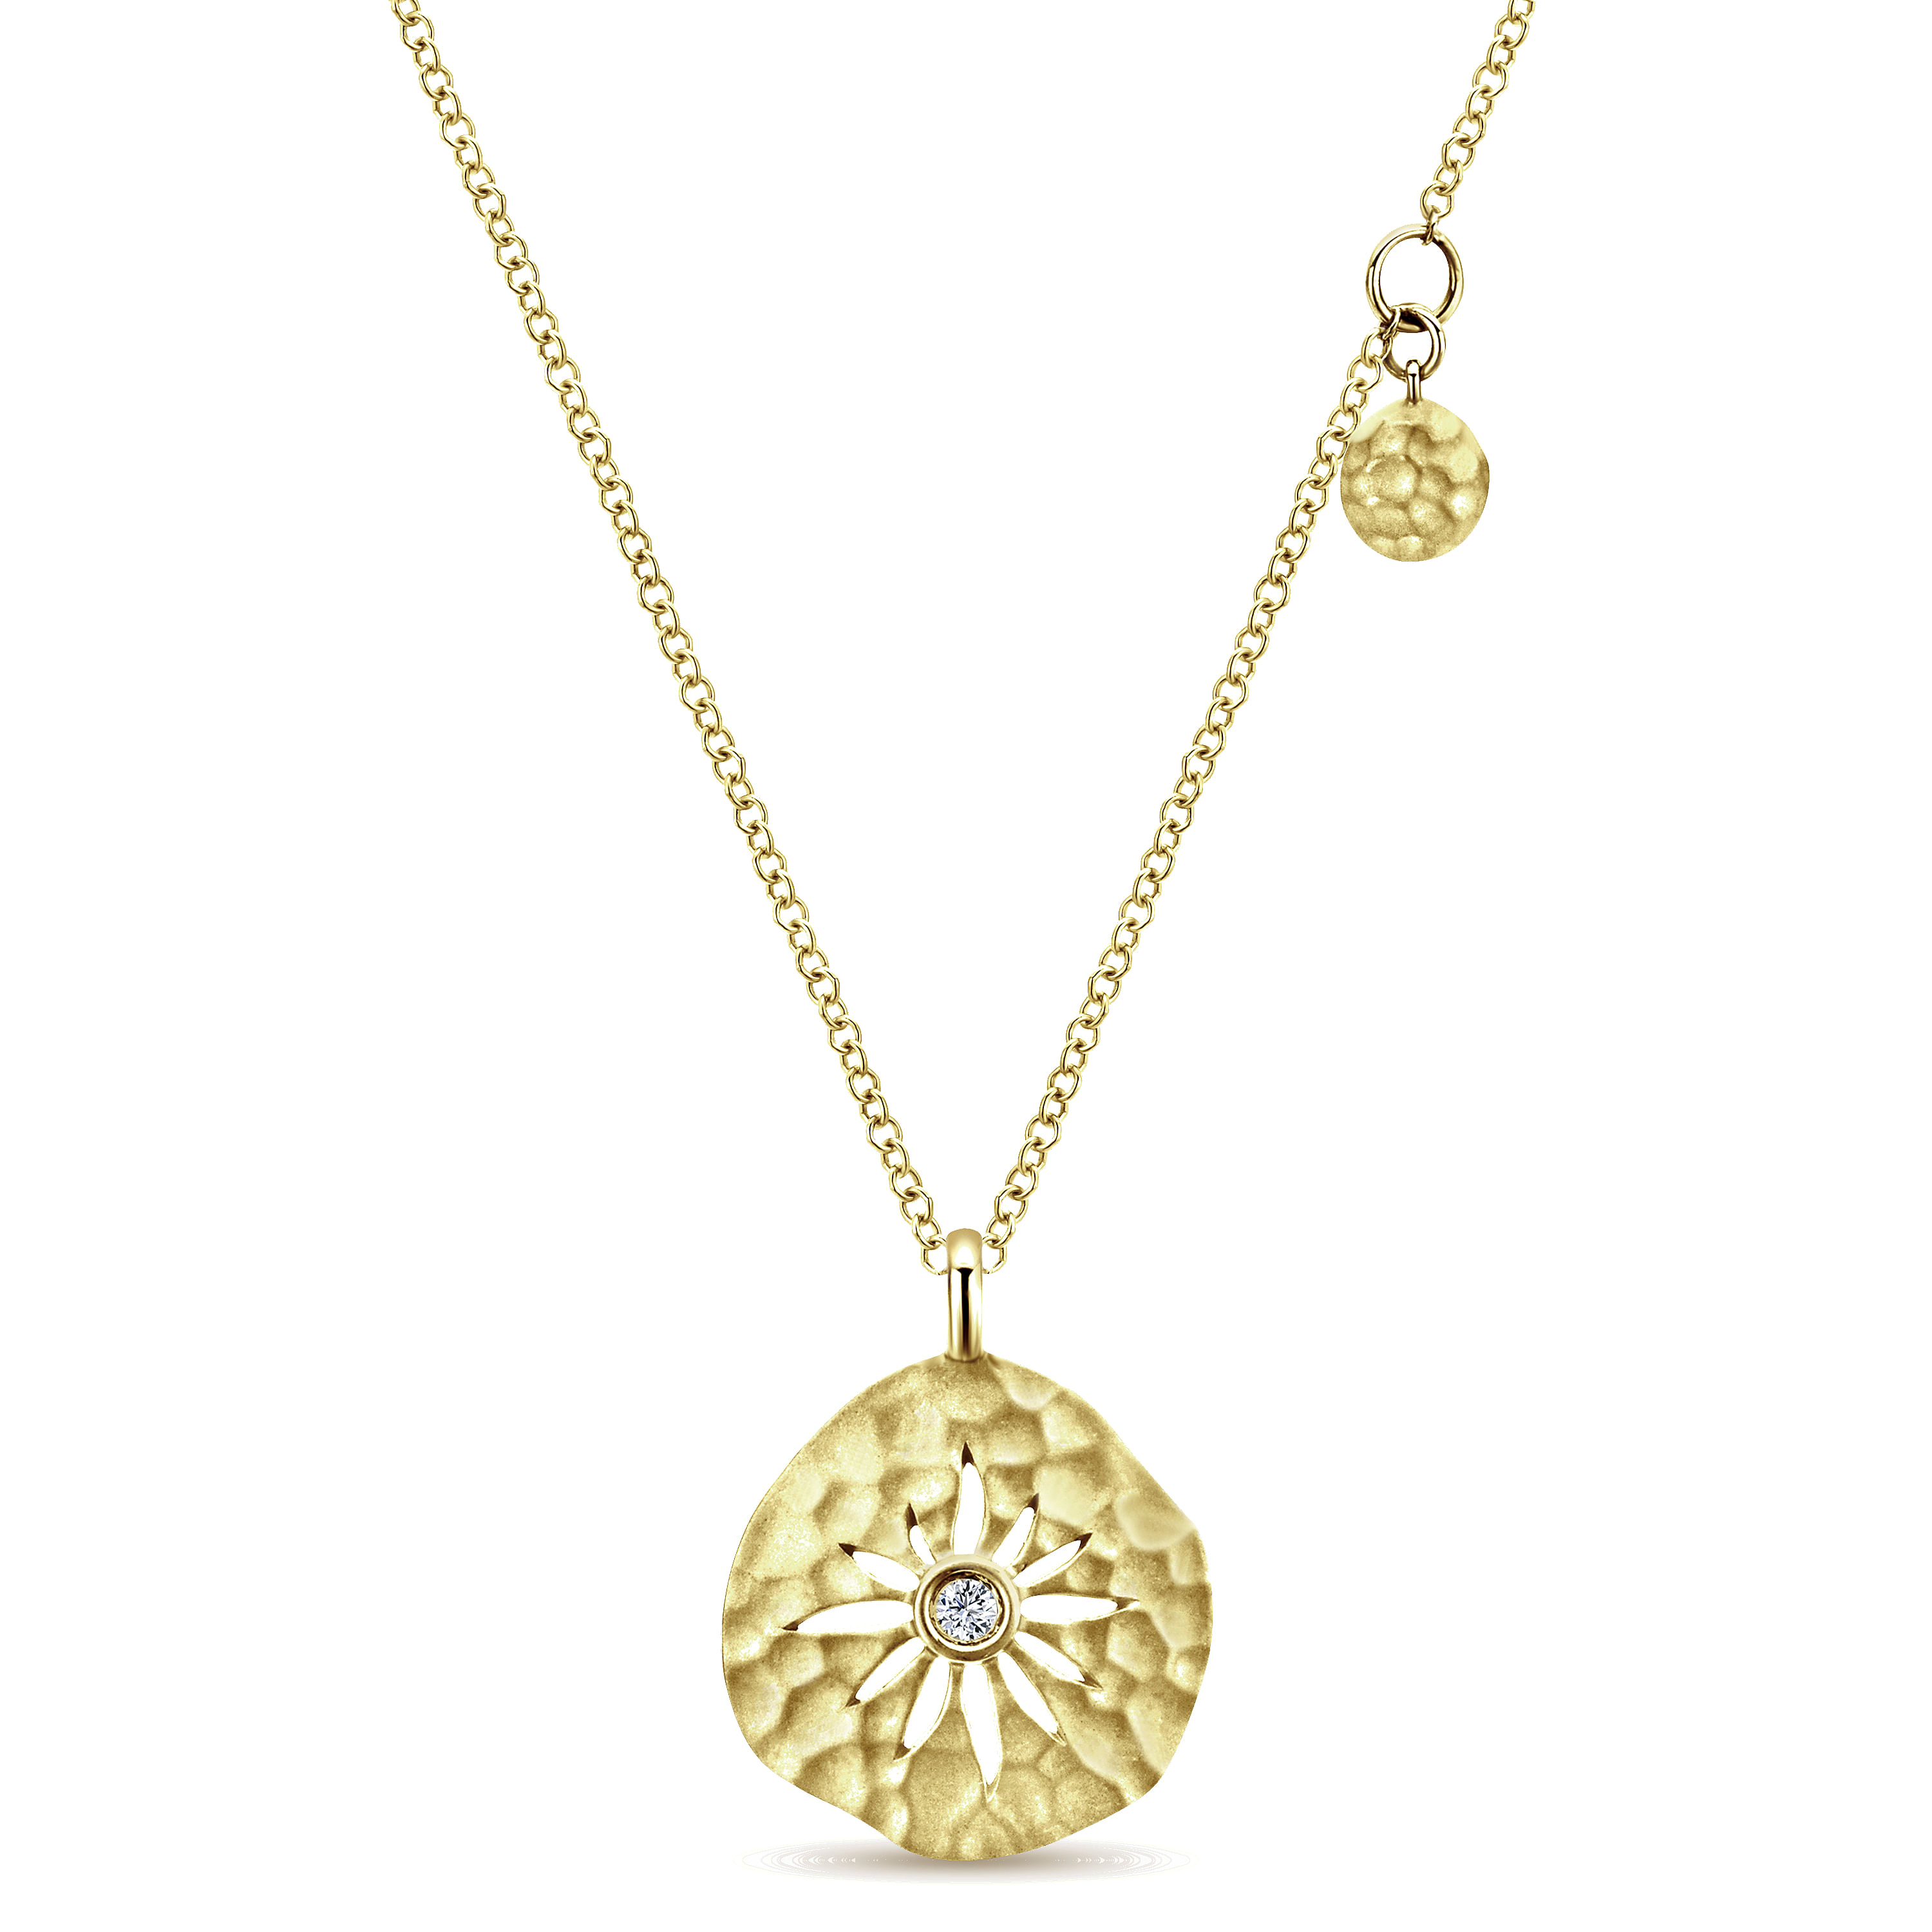 14K Yellow Gold Hammered Pendant Necklace with Diamond and Flower Overlay